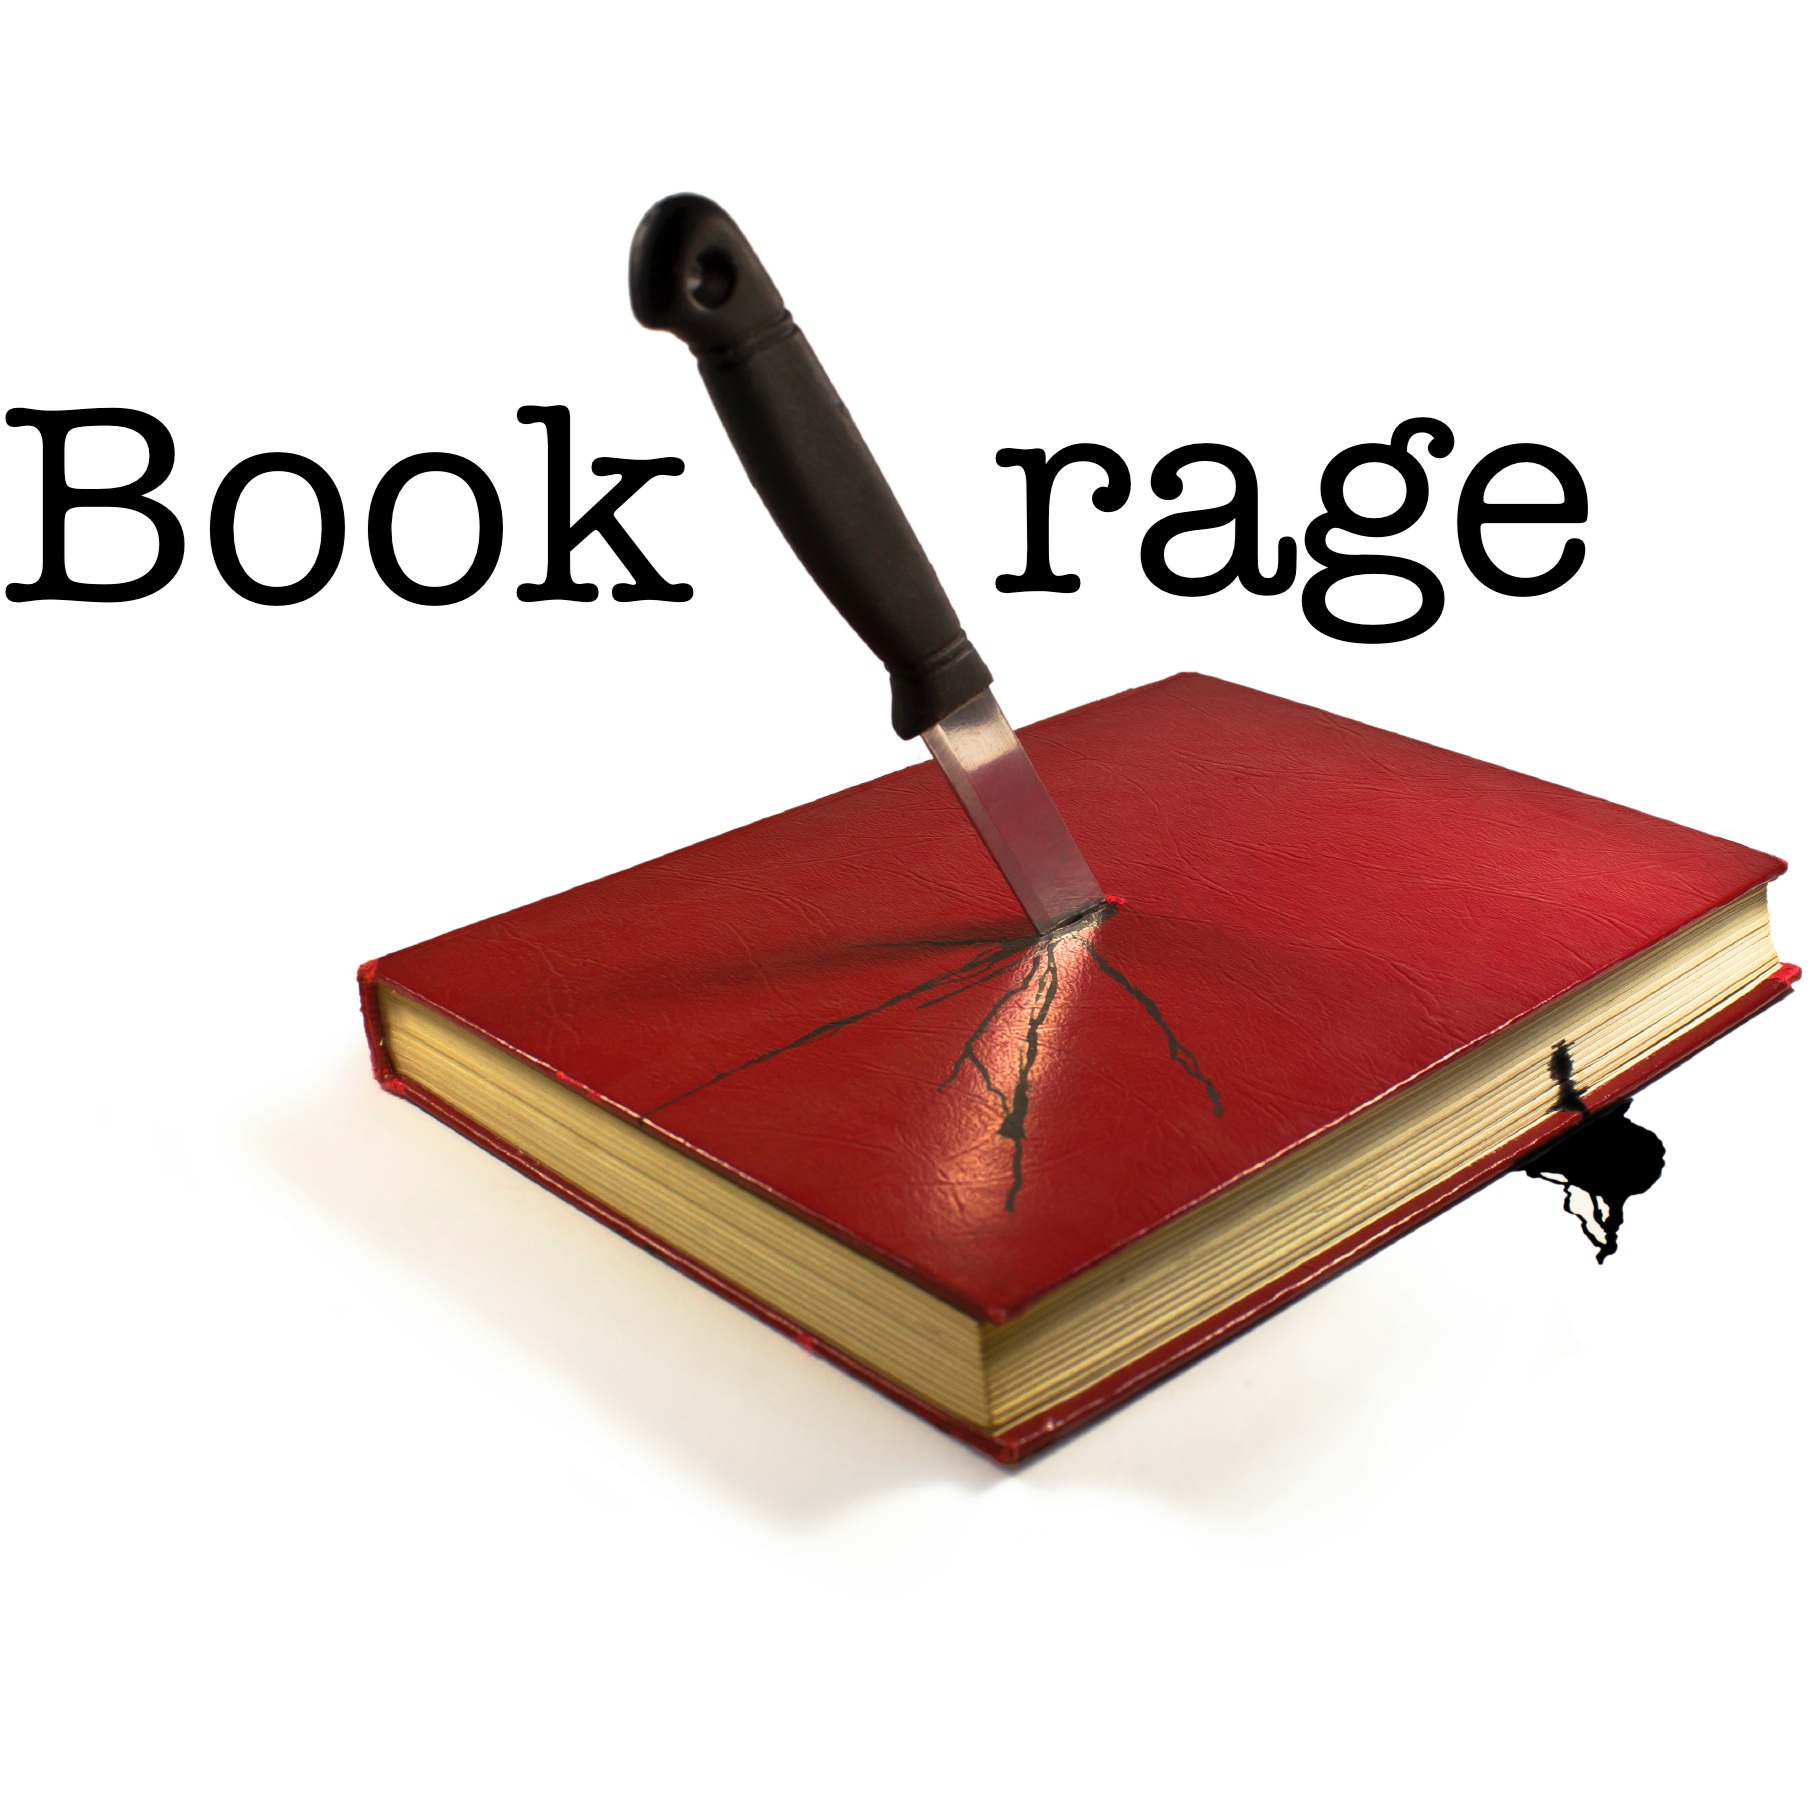 Bookrage: for the mad reader